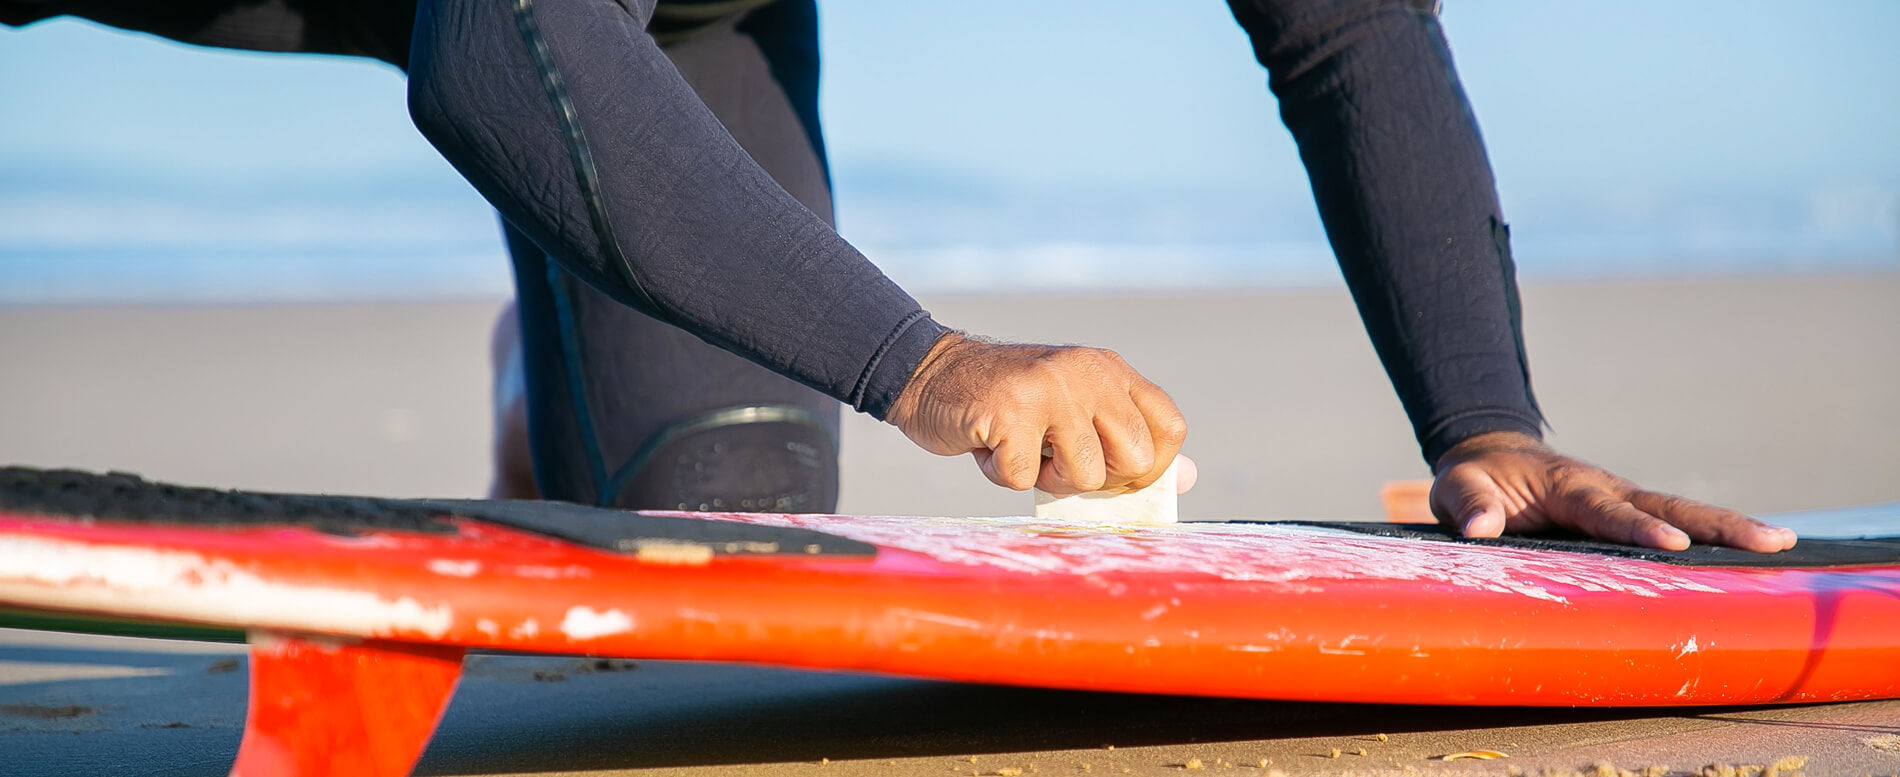 How to wax a surfboards